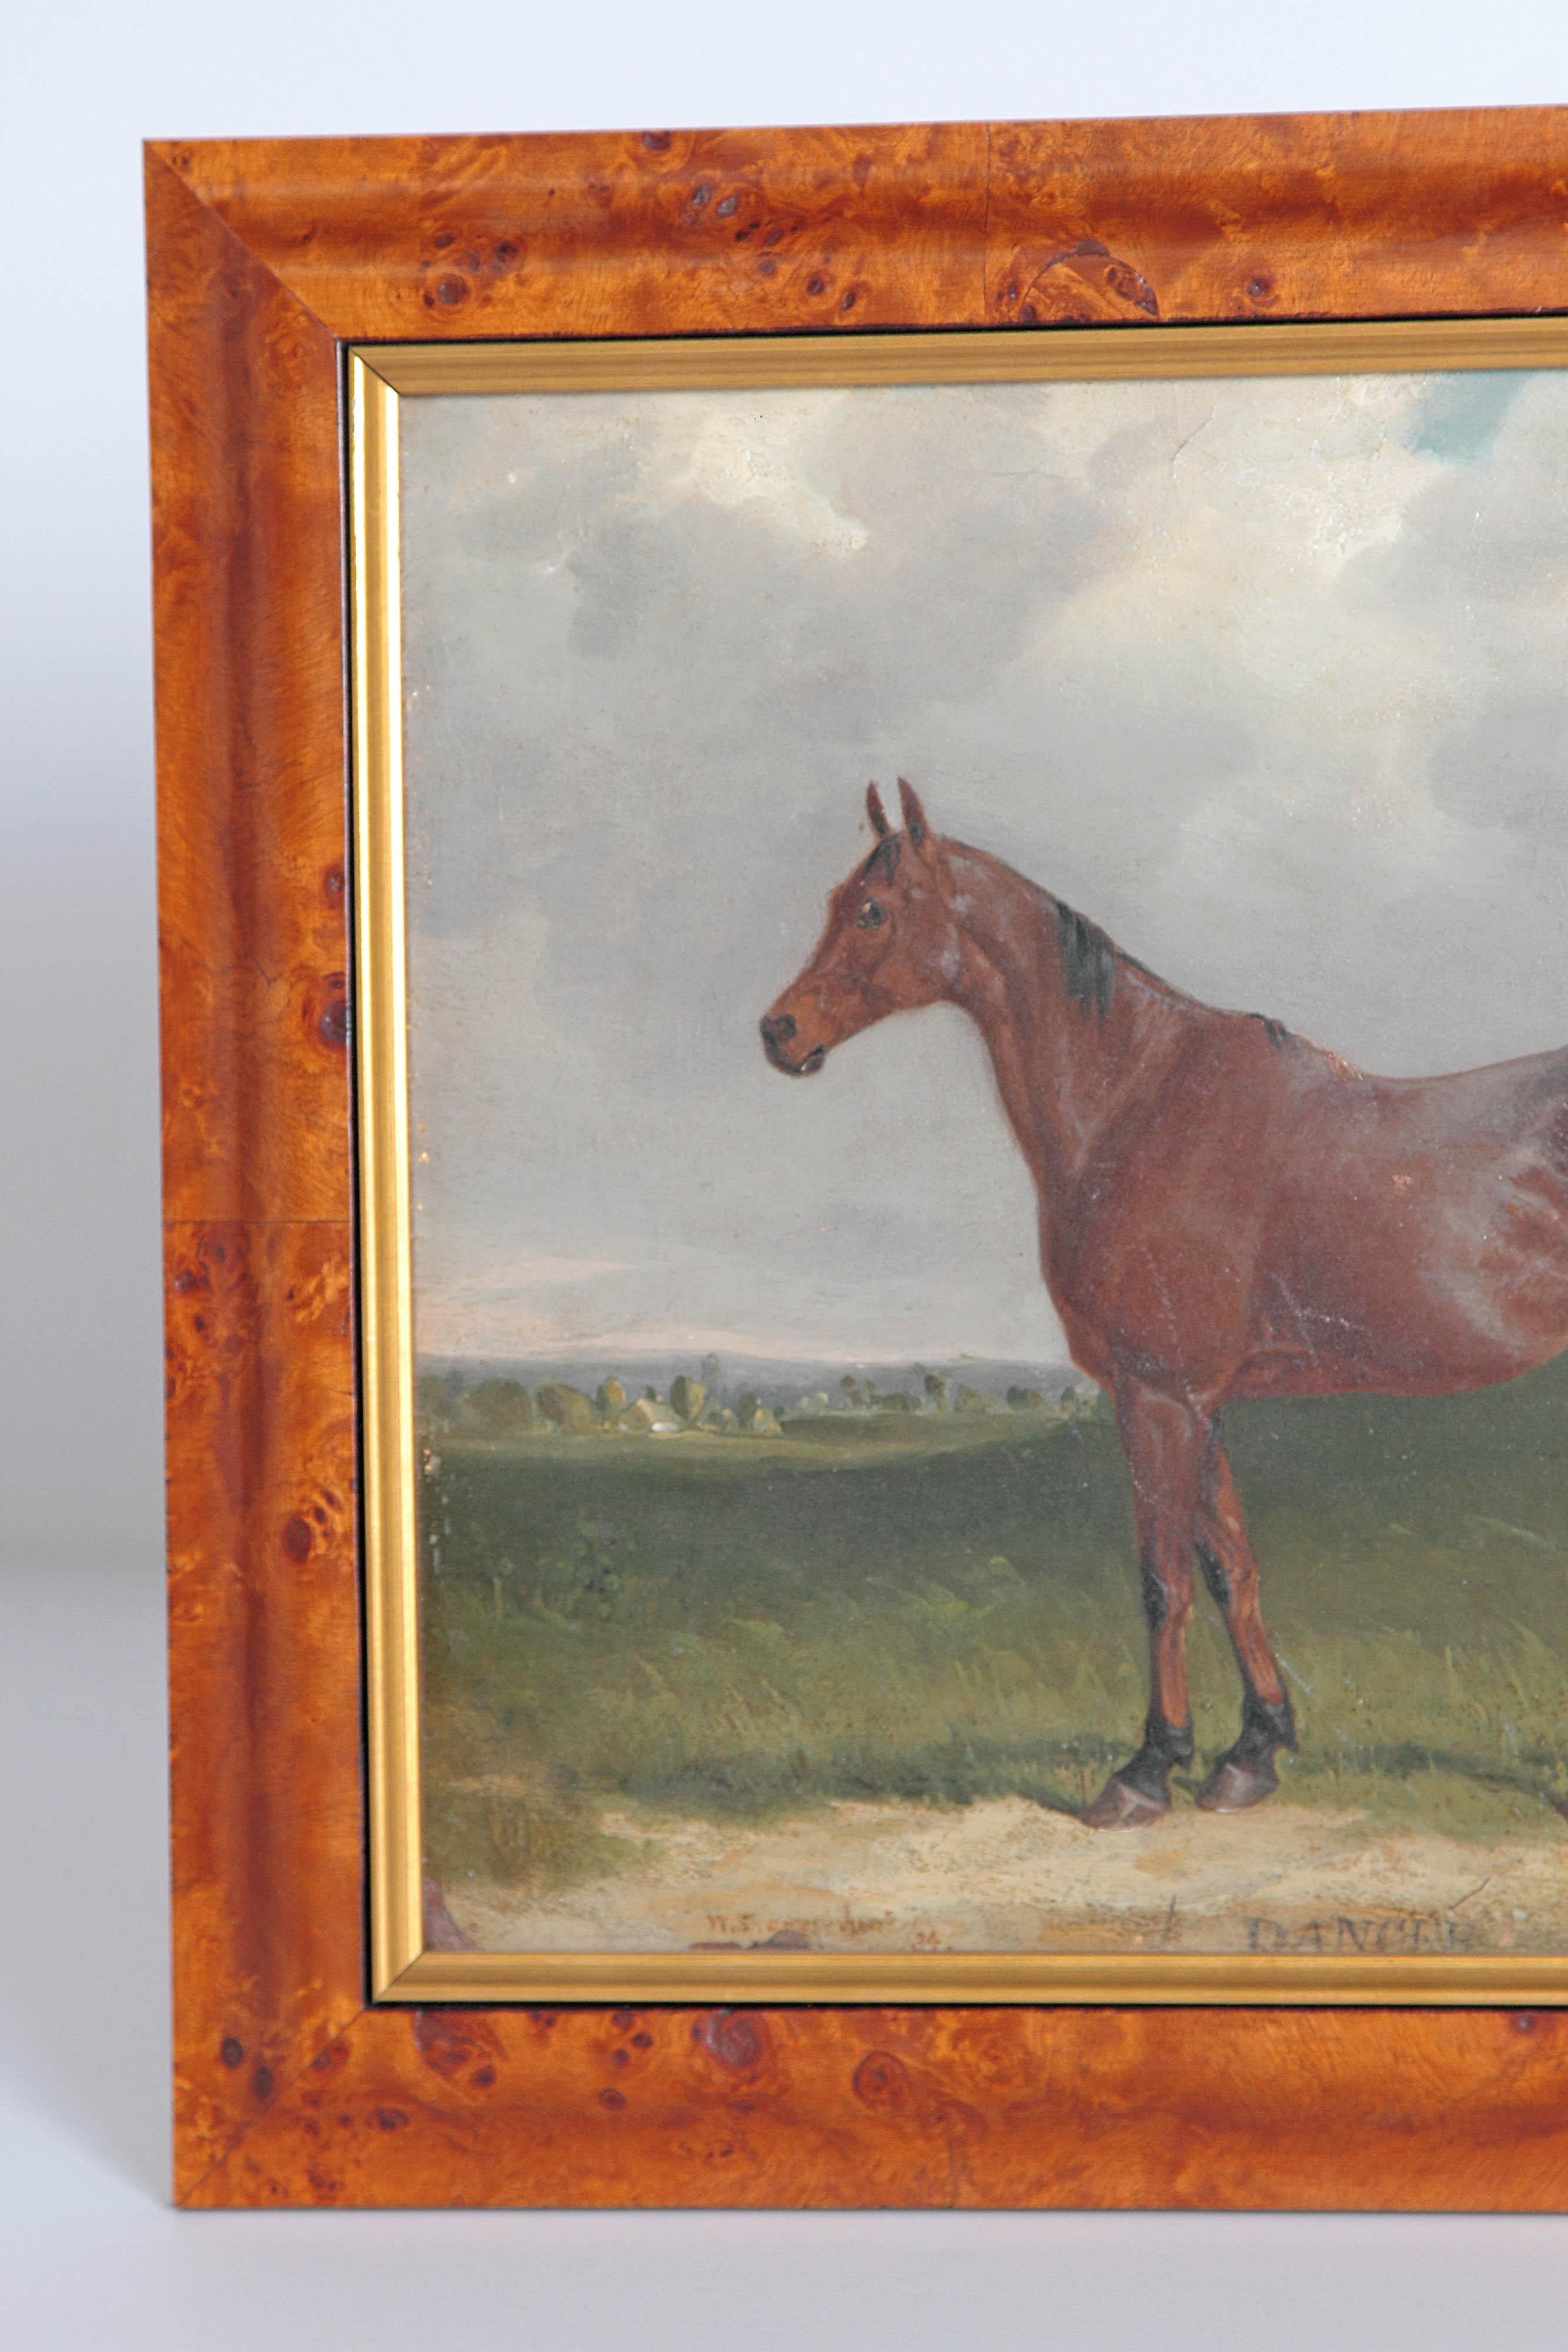 A beautifully painted horse portrait in landscape titled Dancer, signed and dated 1834. Painting measures 11.5